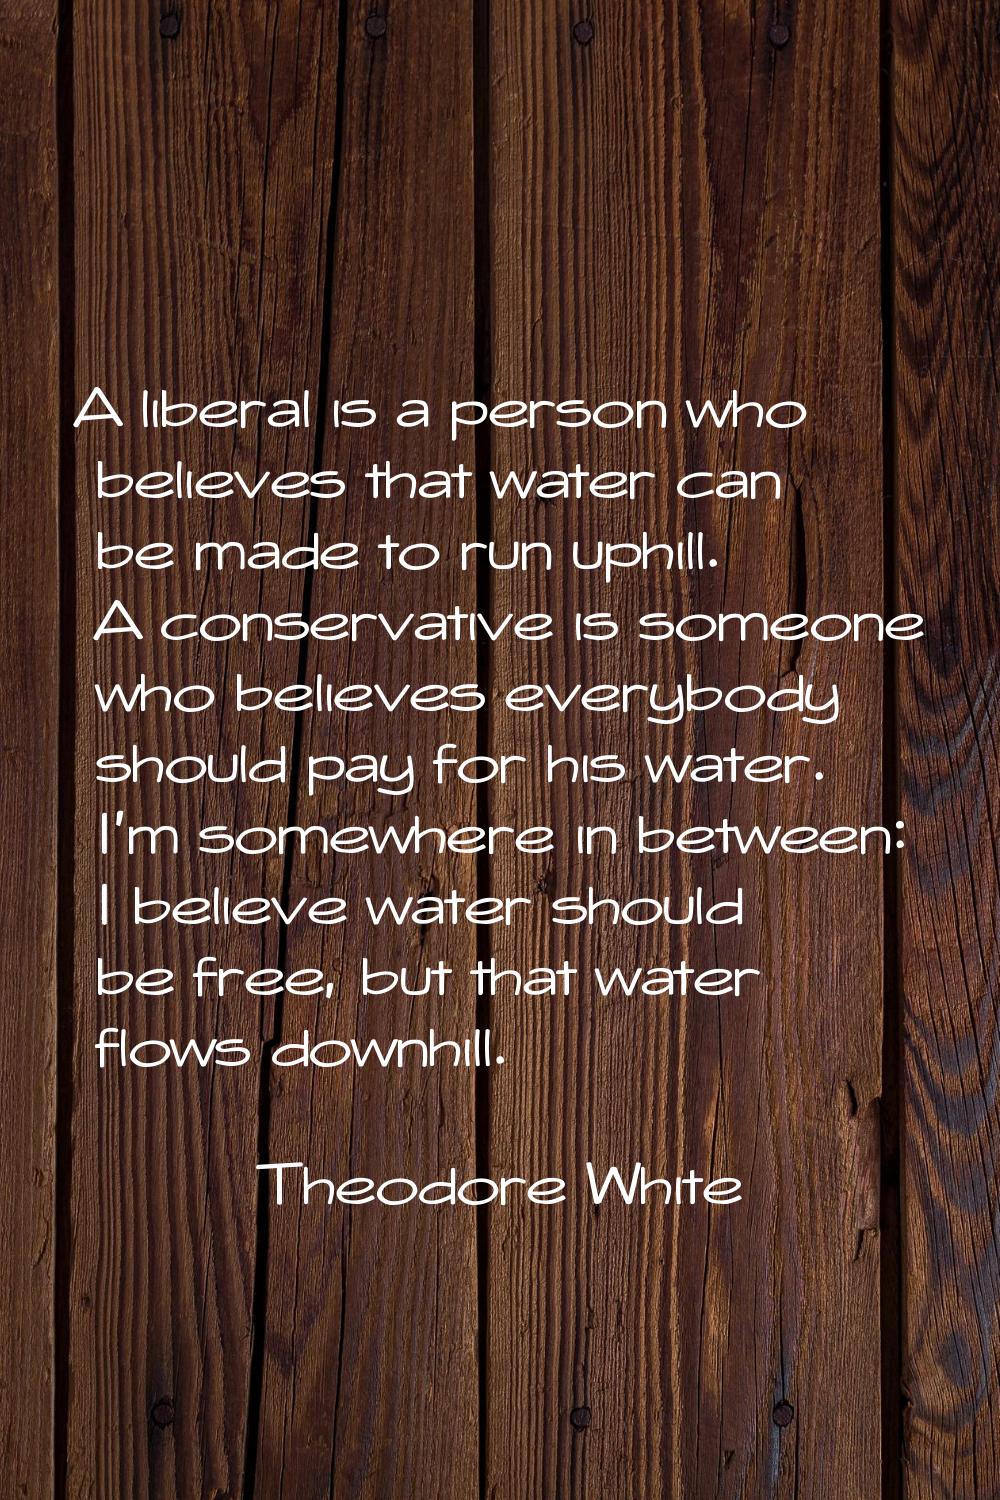 A liberal is a person who believes that water can be made to run uphill. A conservative is someone 